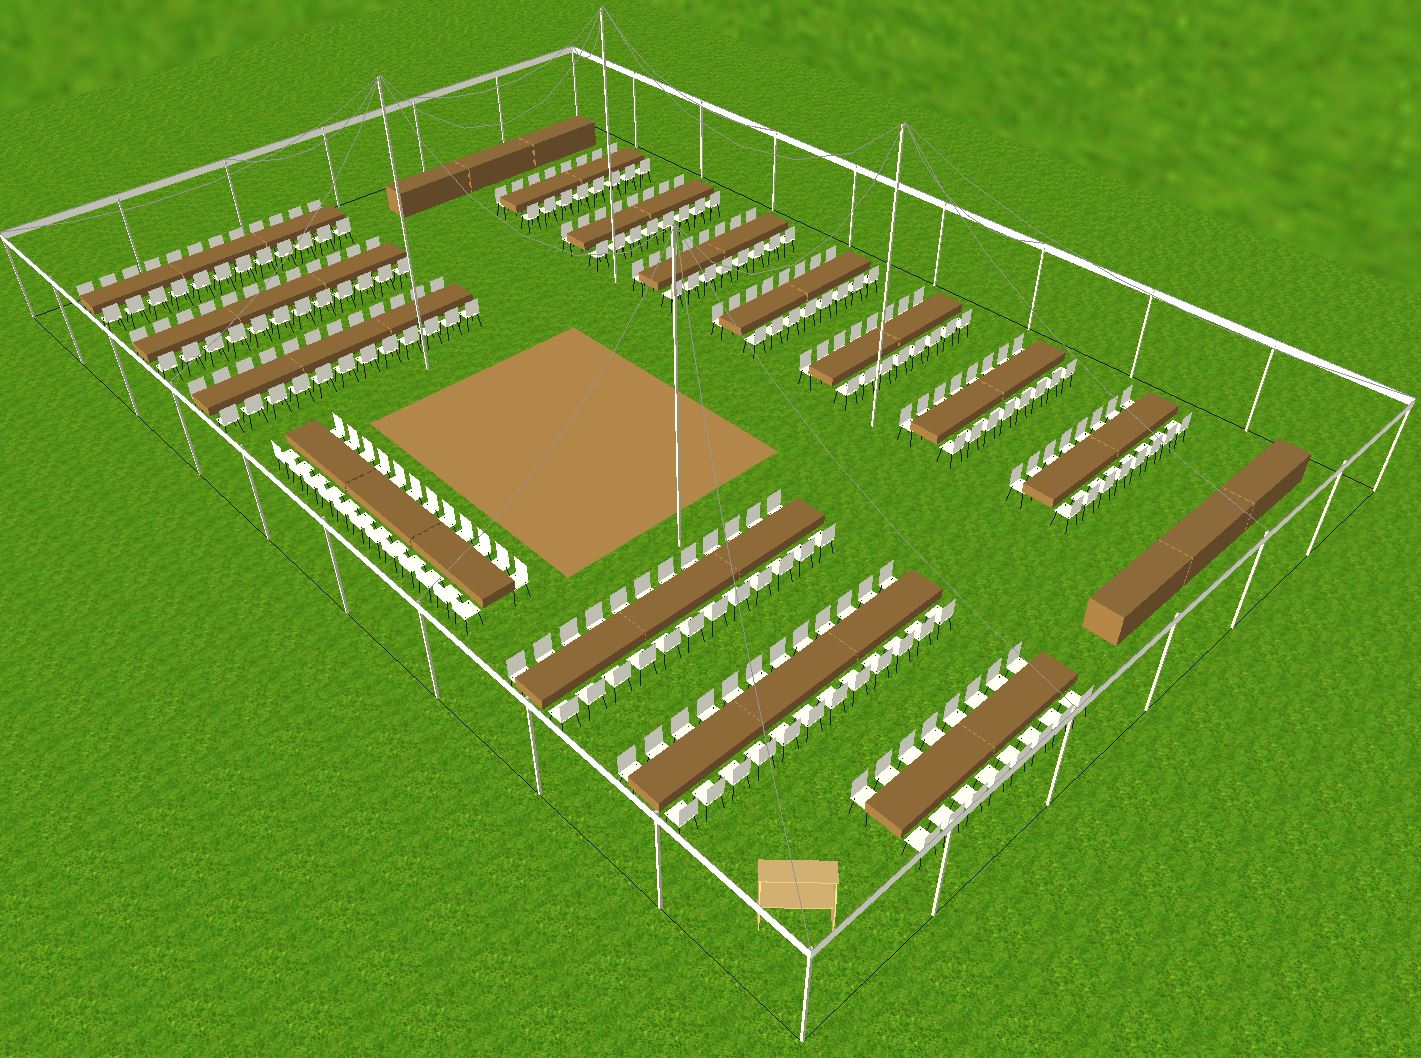 60x90 tent Large seating layout